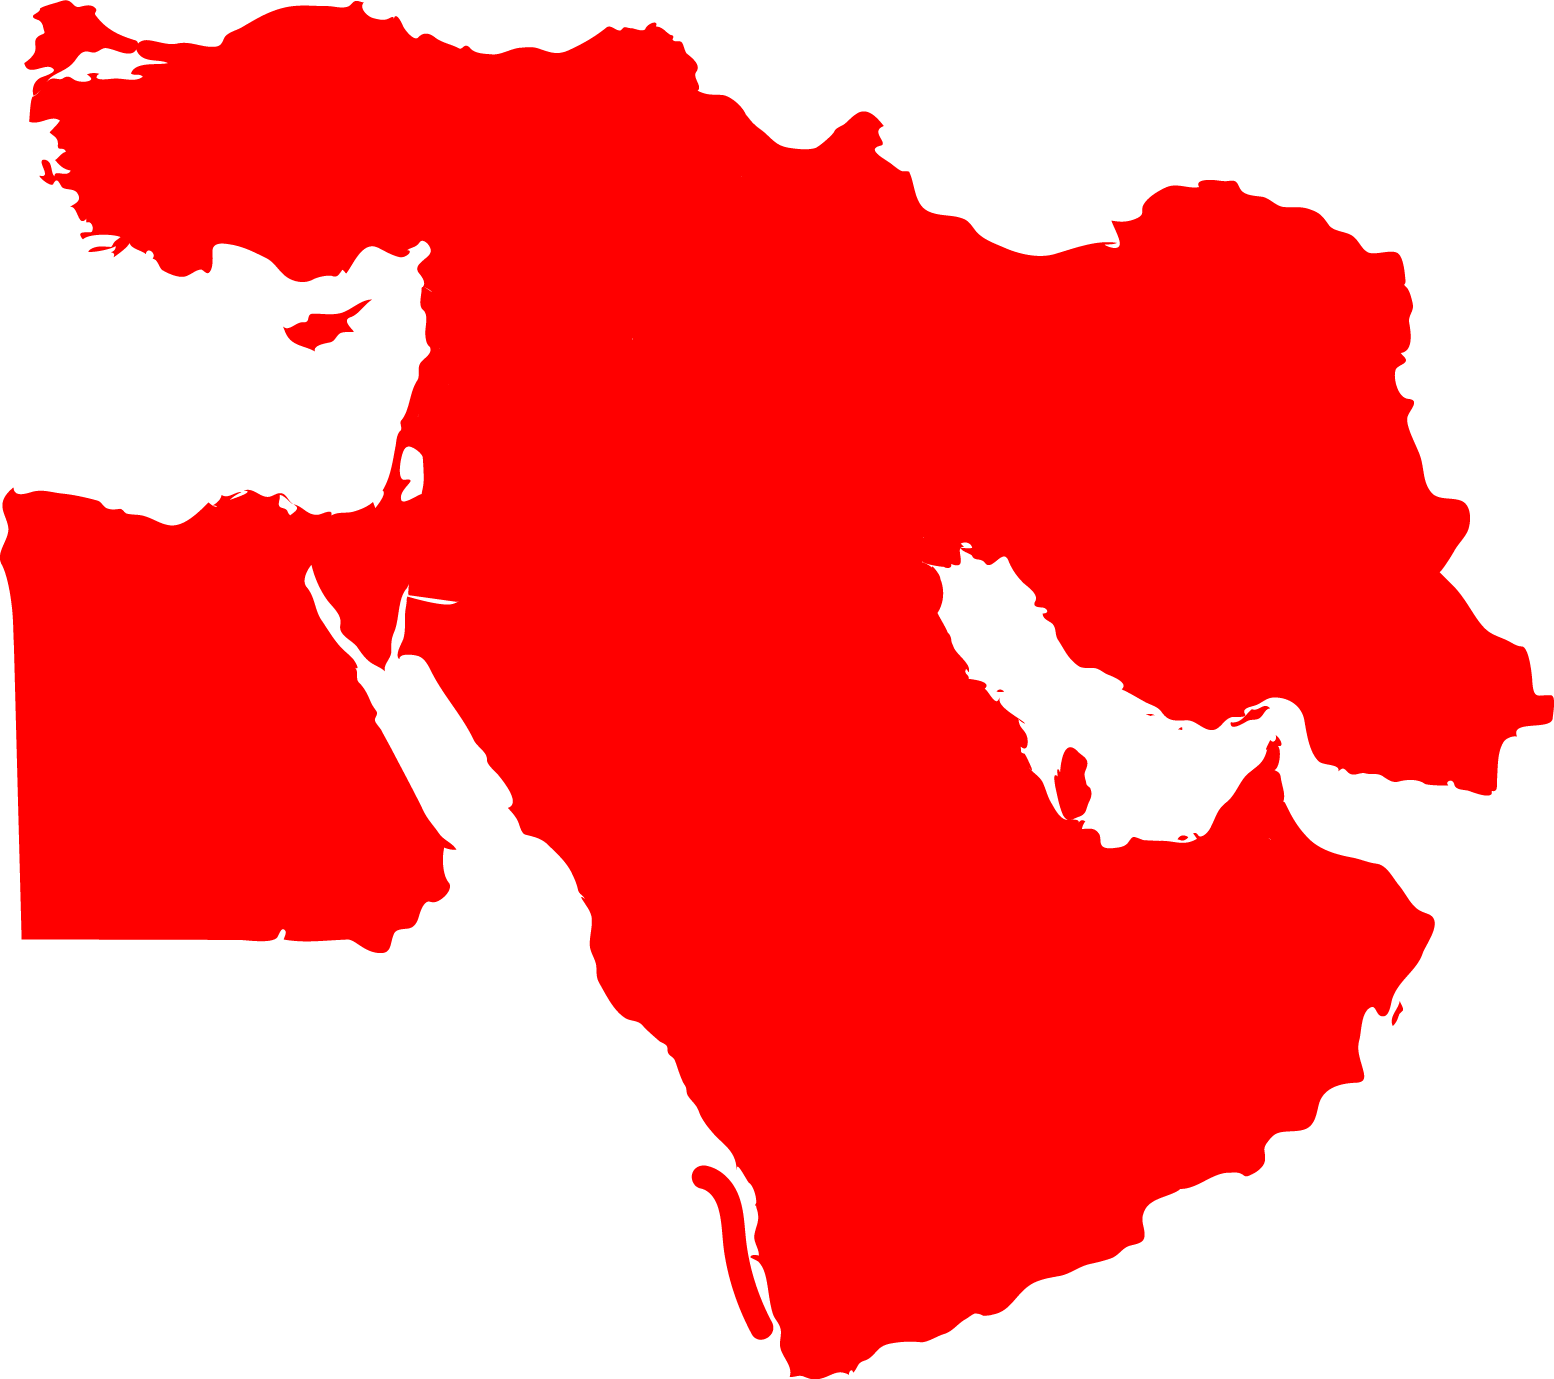 Red map of the middle east